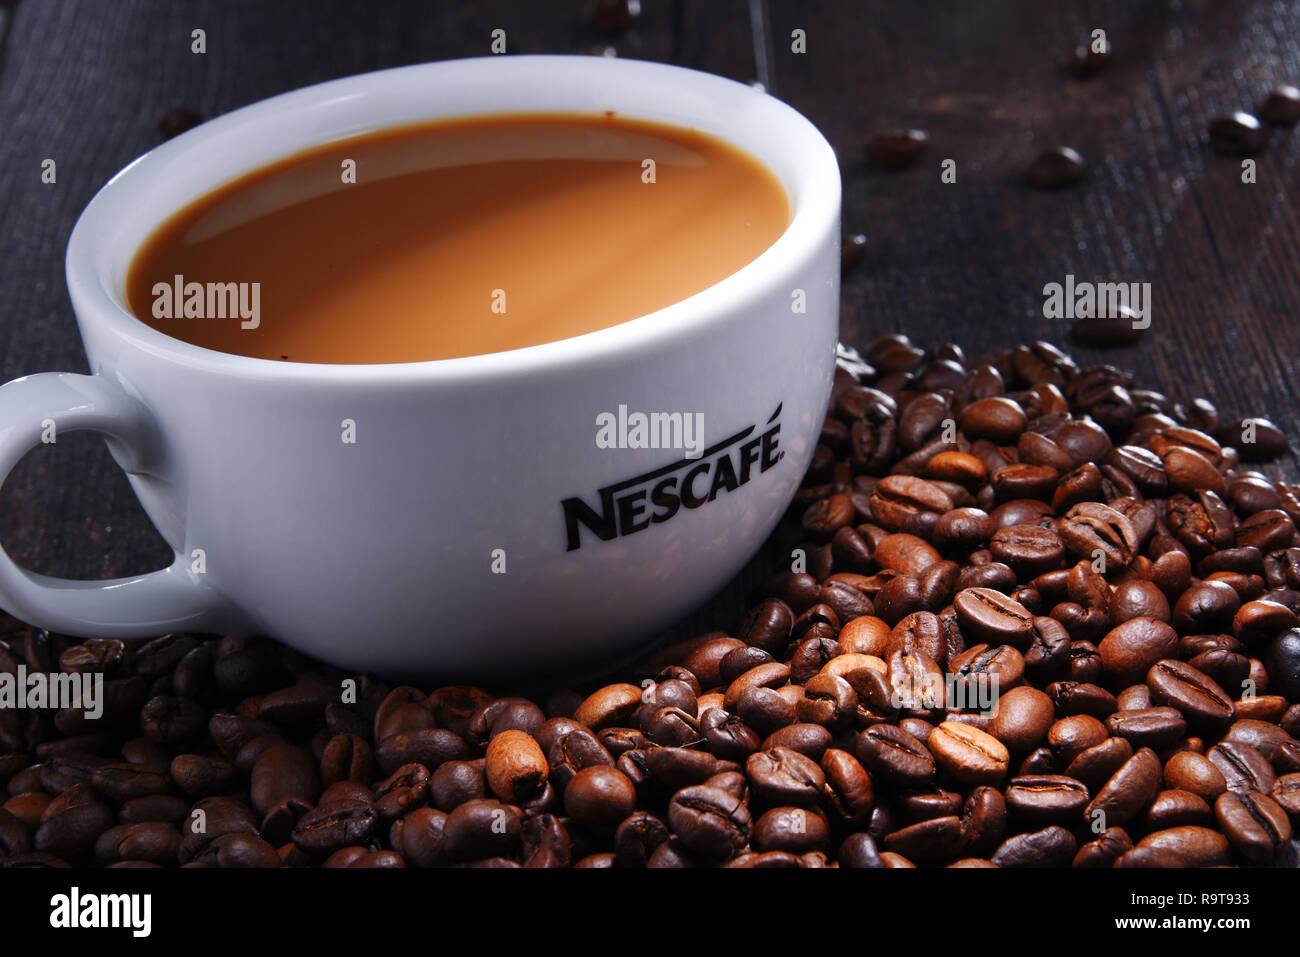 Detail Nestle Coffee Cup Nomer 19